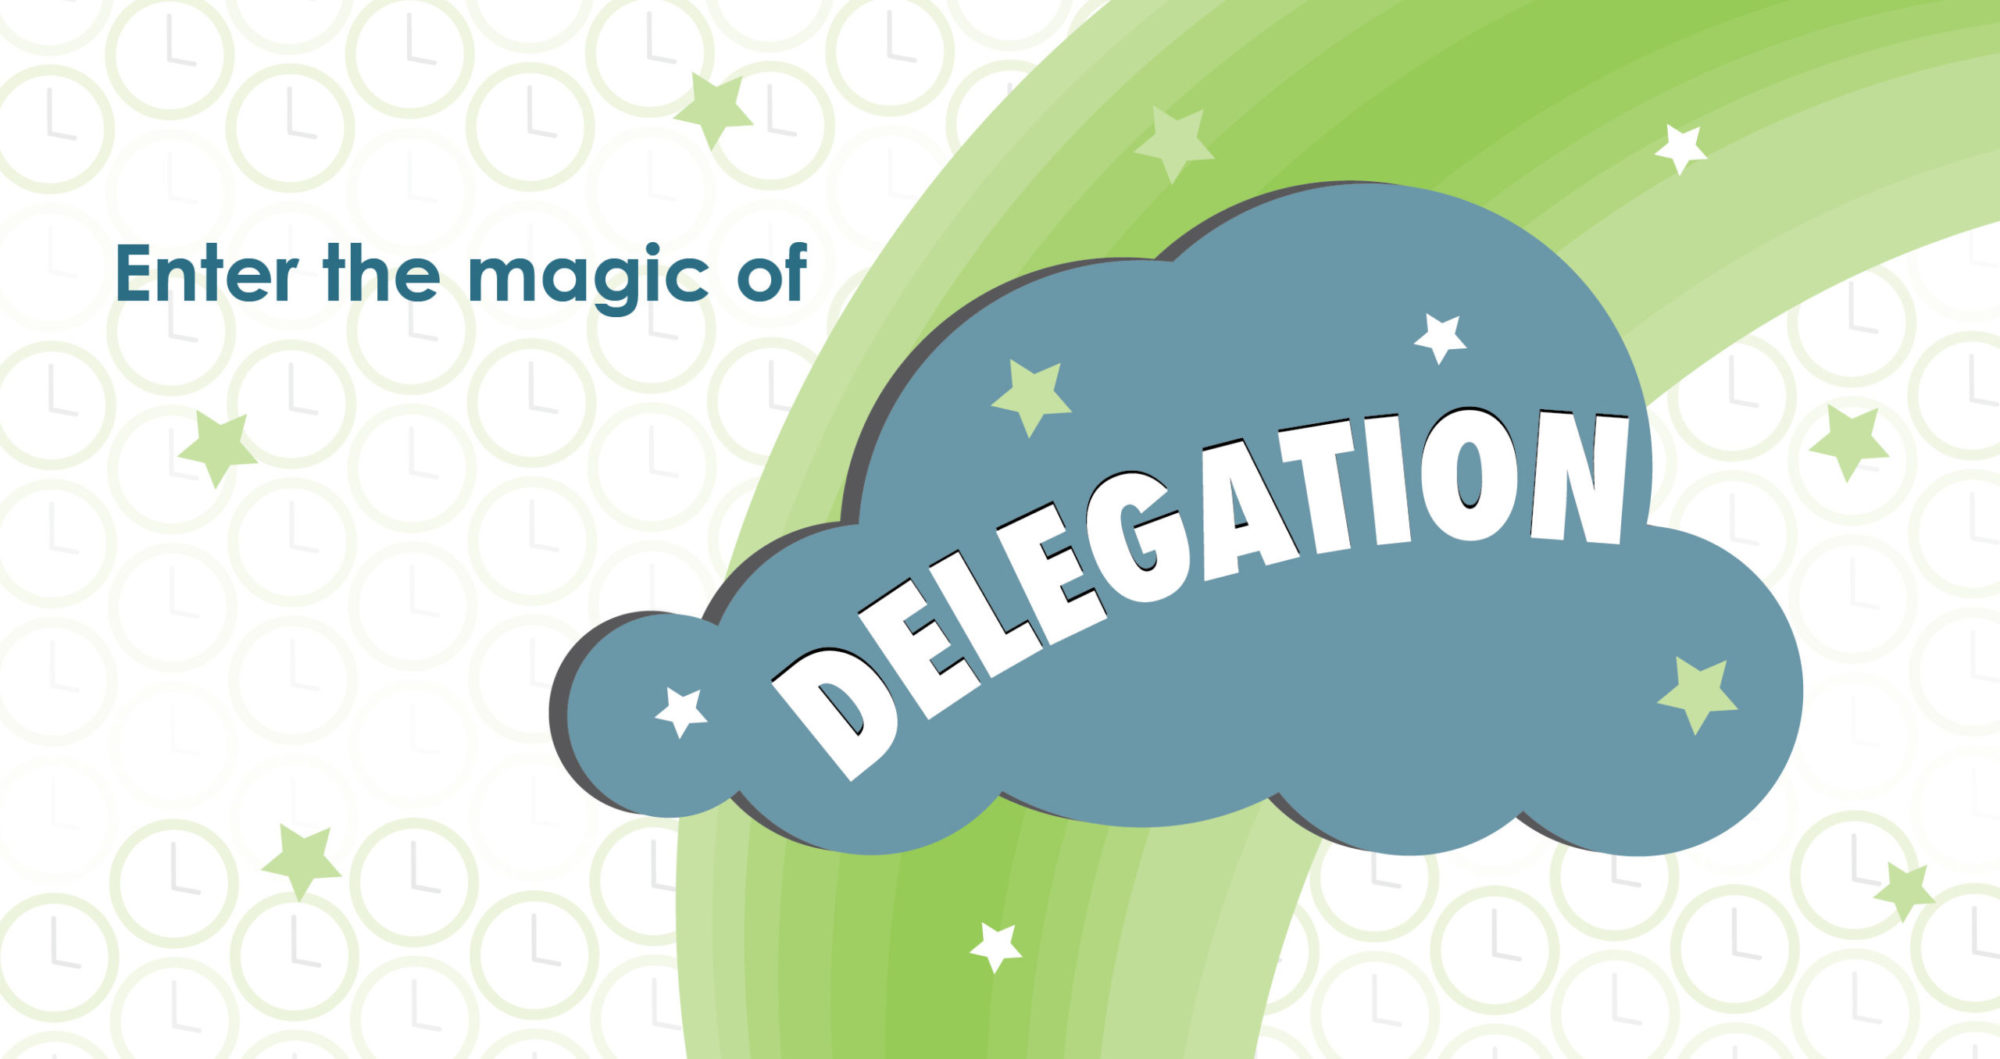 Many cartoon clocks form a pattern with a cartoon cloud and text that reads, "enter the magic of delegation."